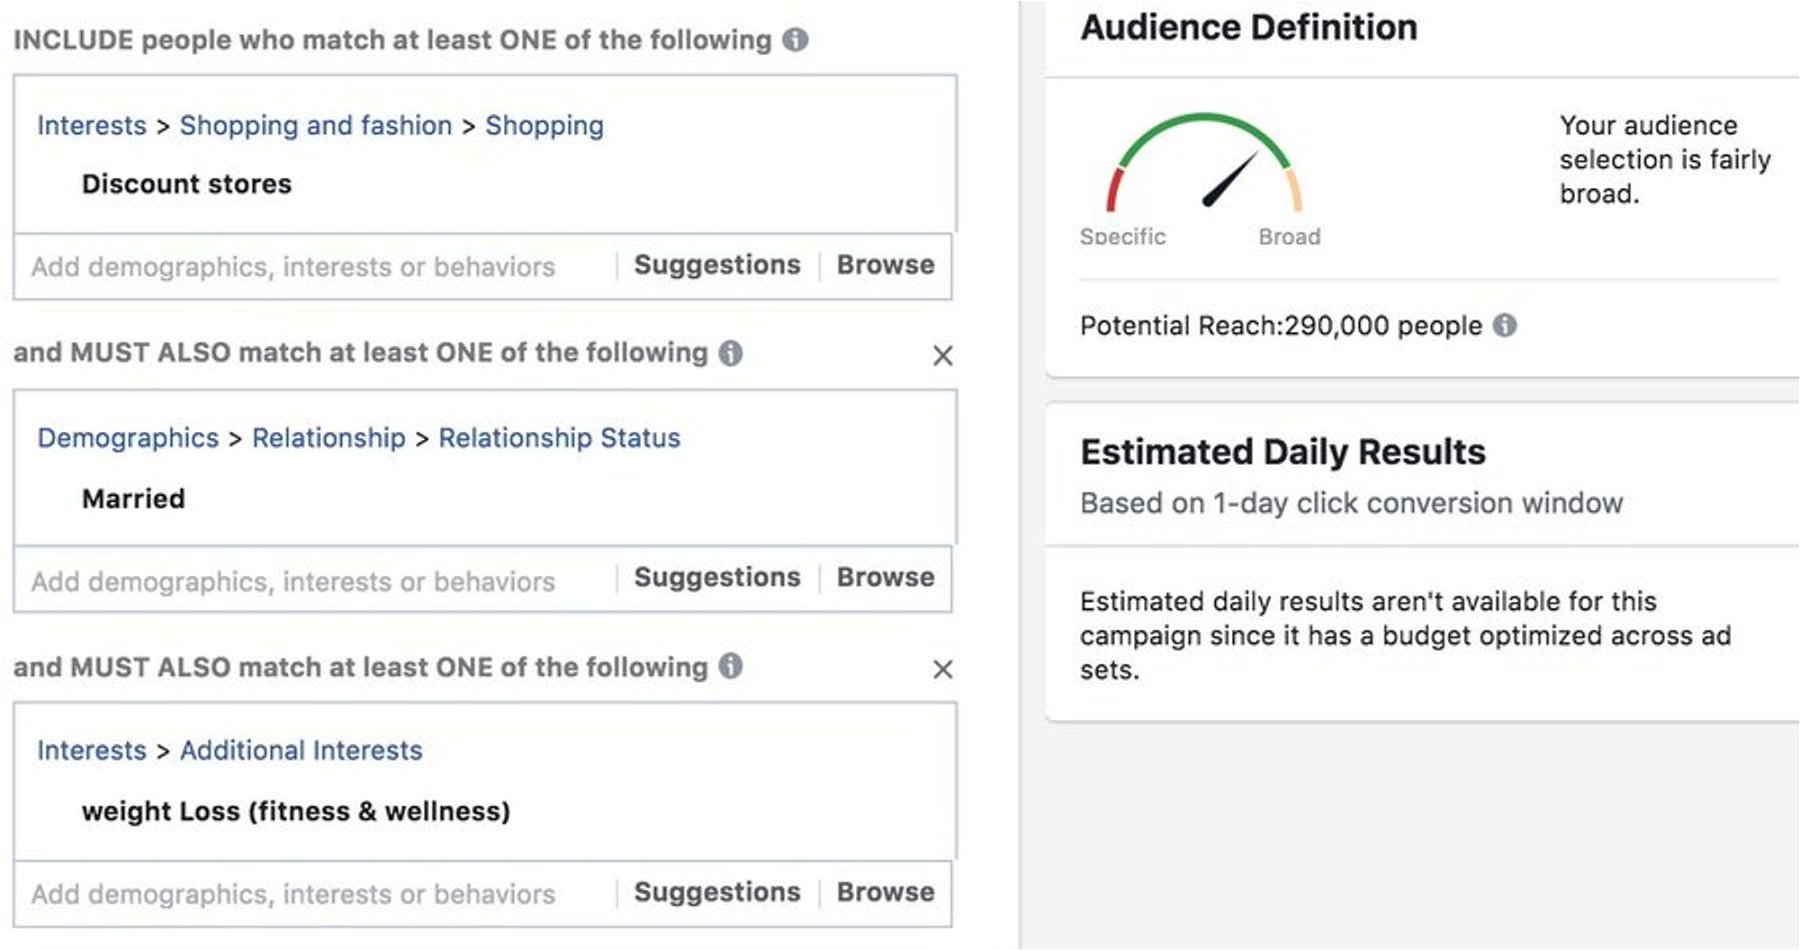 When running Facebook ads for interest-based SaaS prospects, start broad and not narrow.